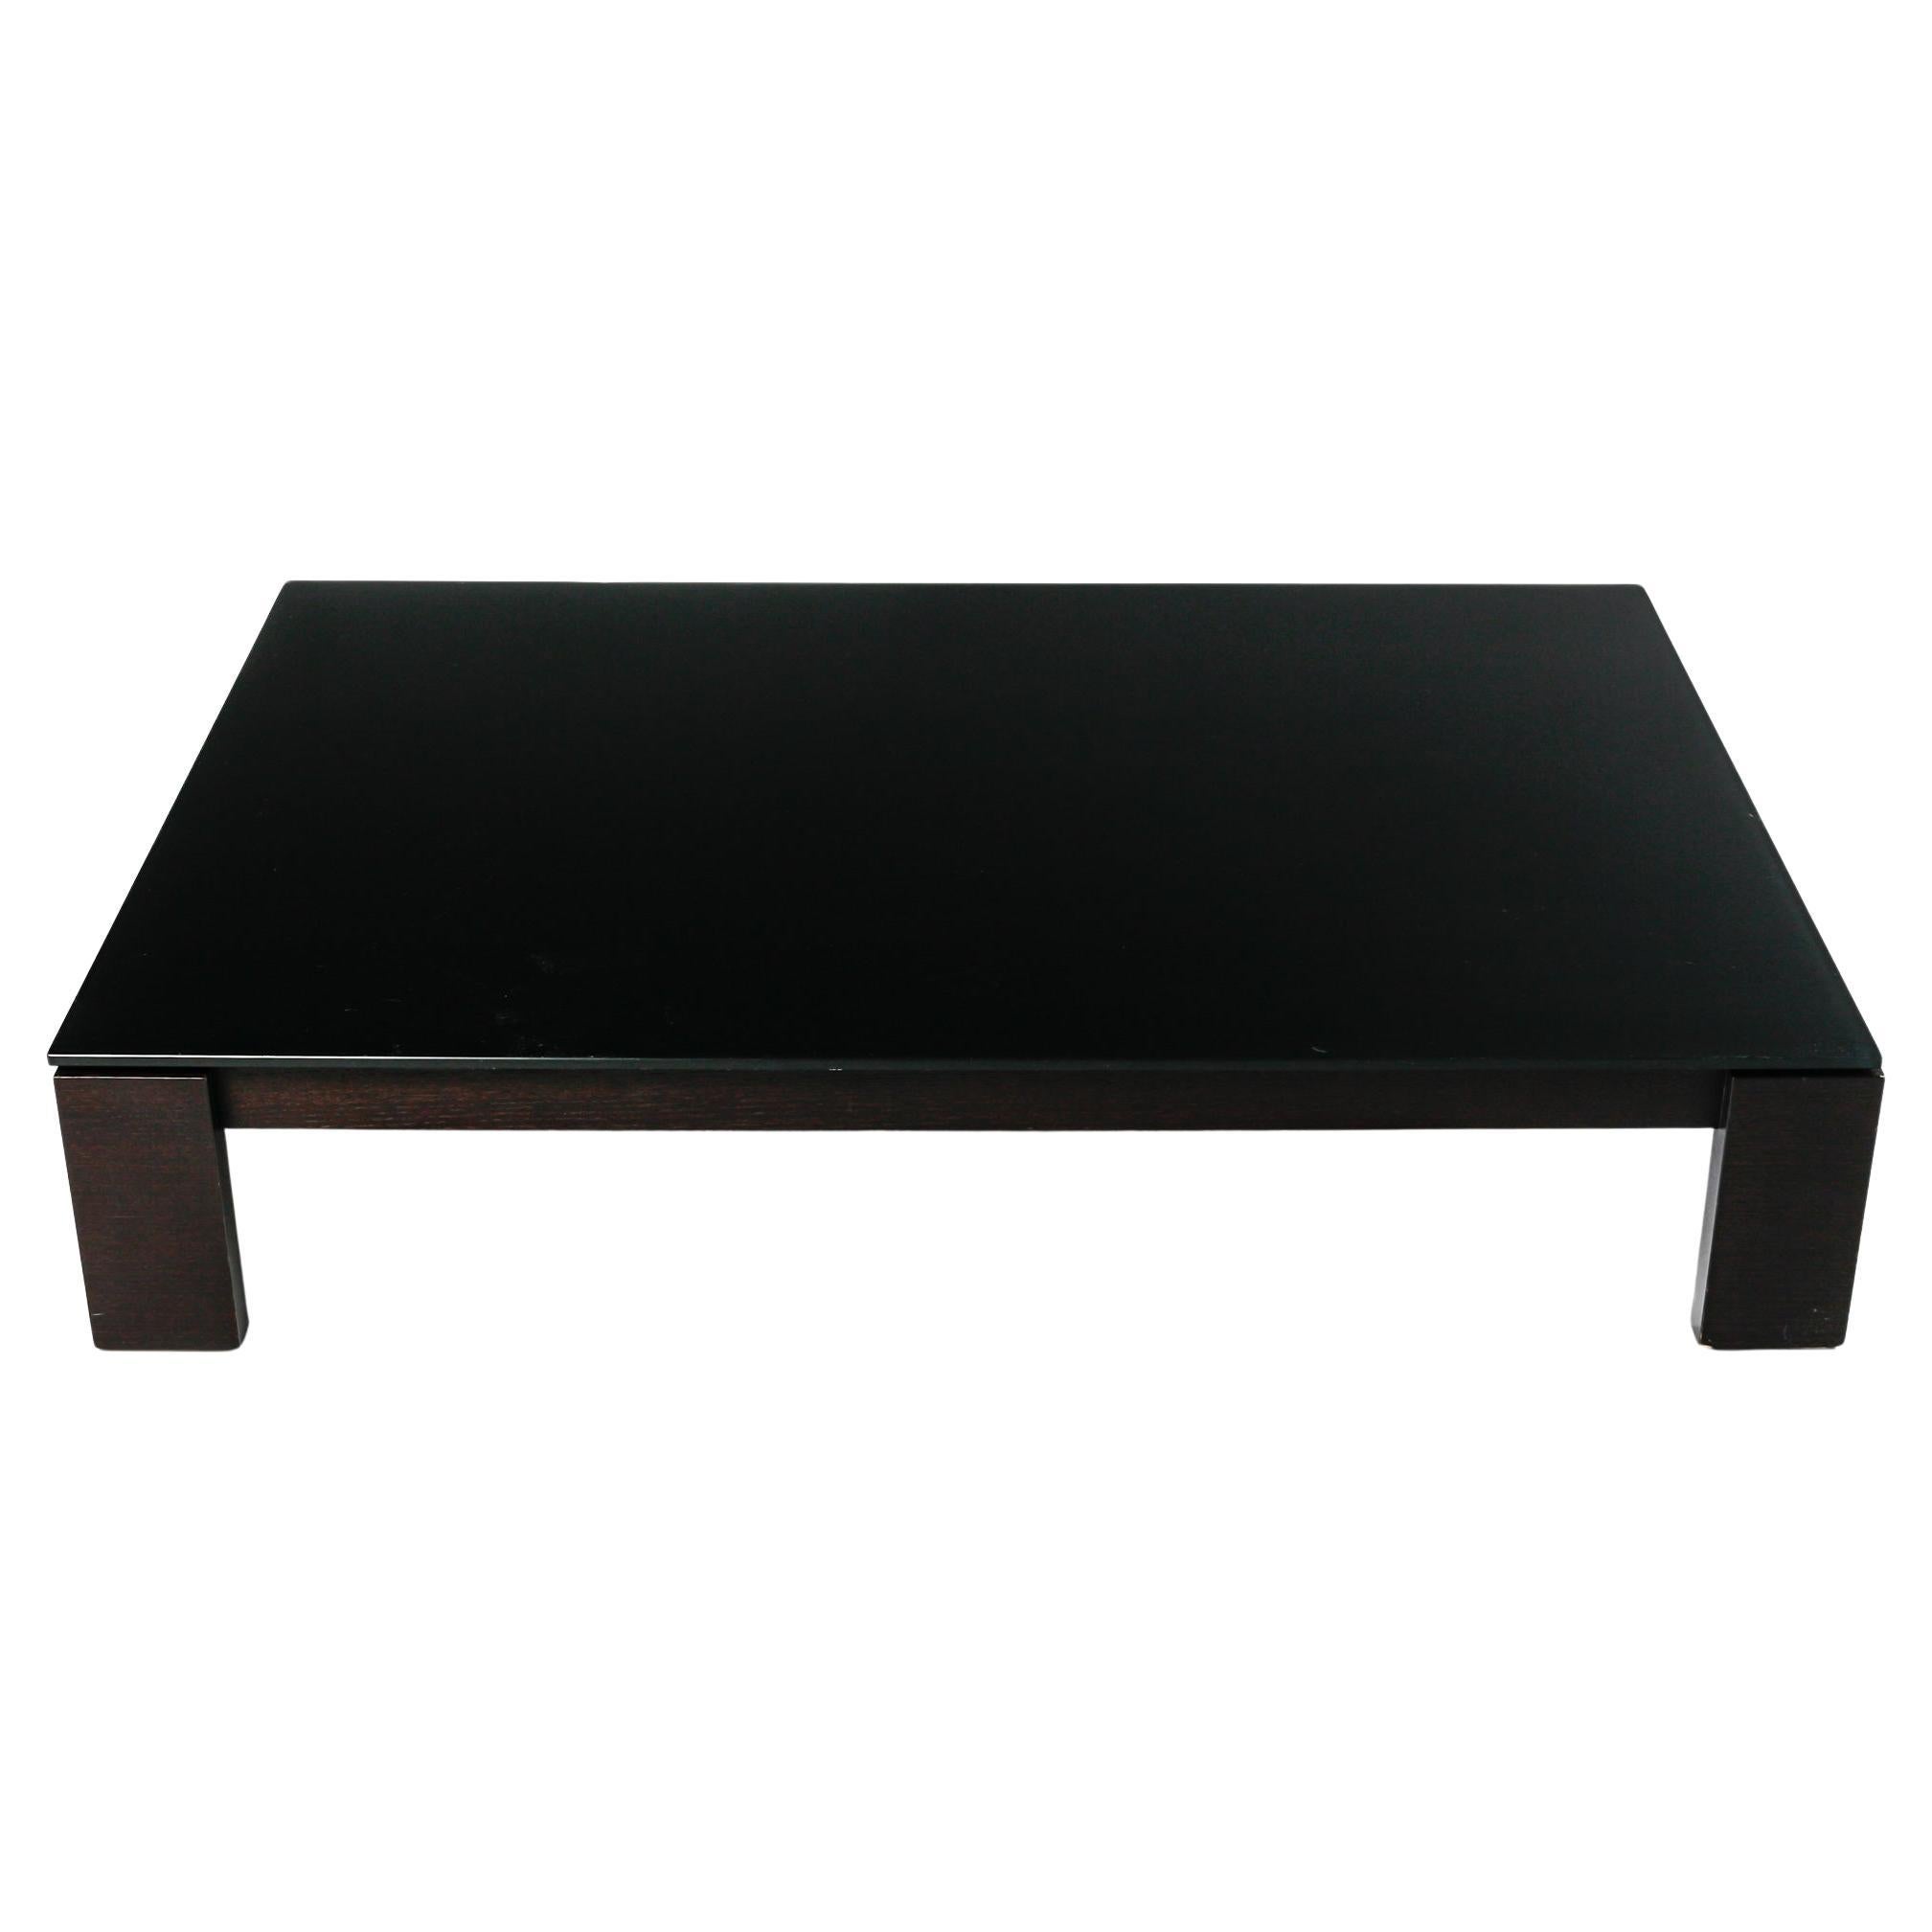 1980s Coffee Table, Modern Design. For Sale